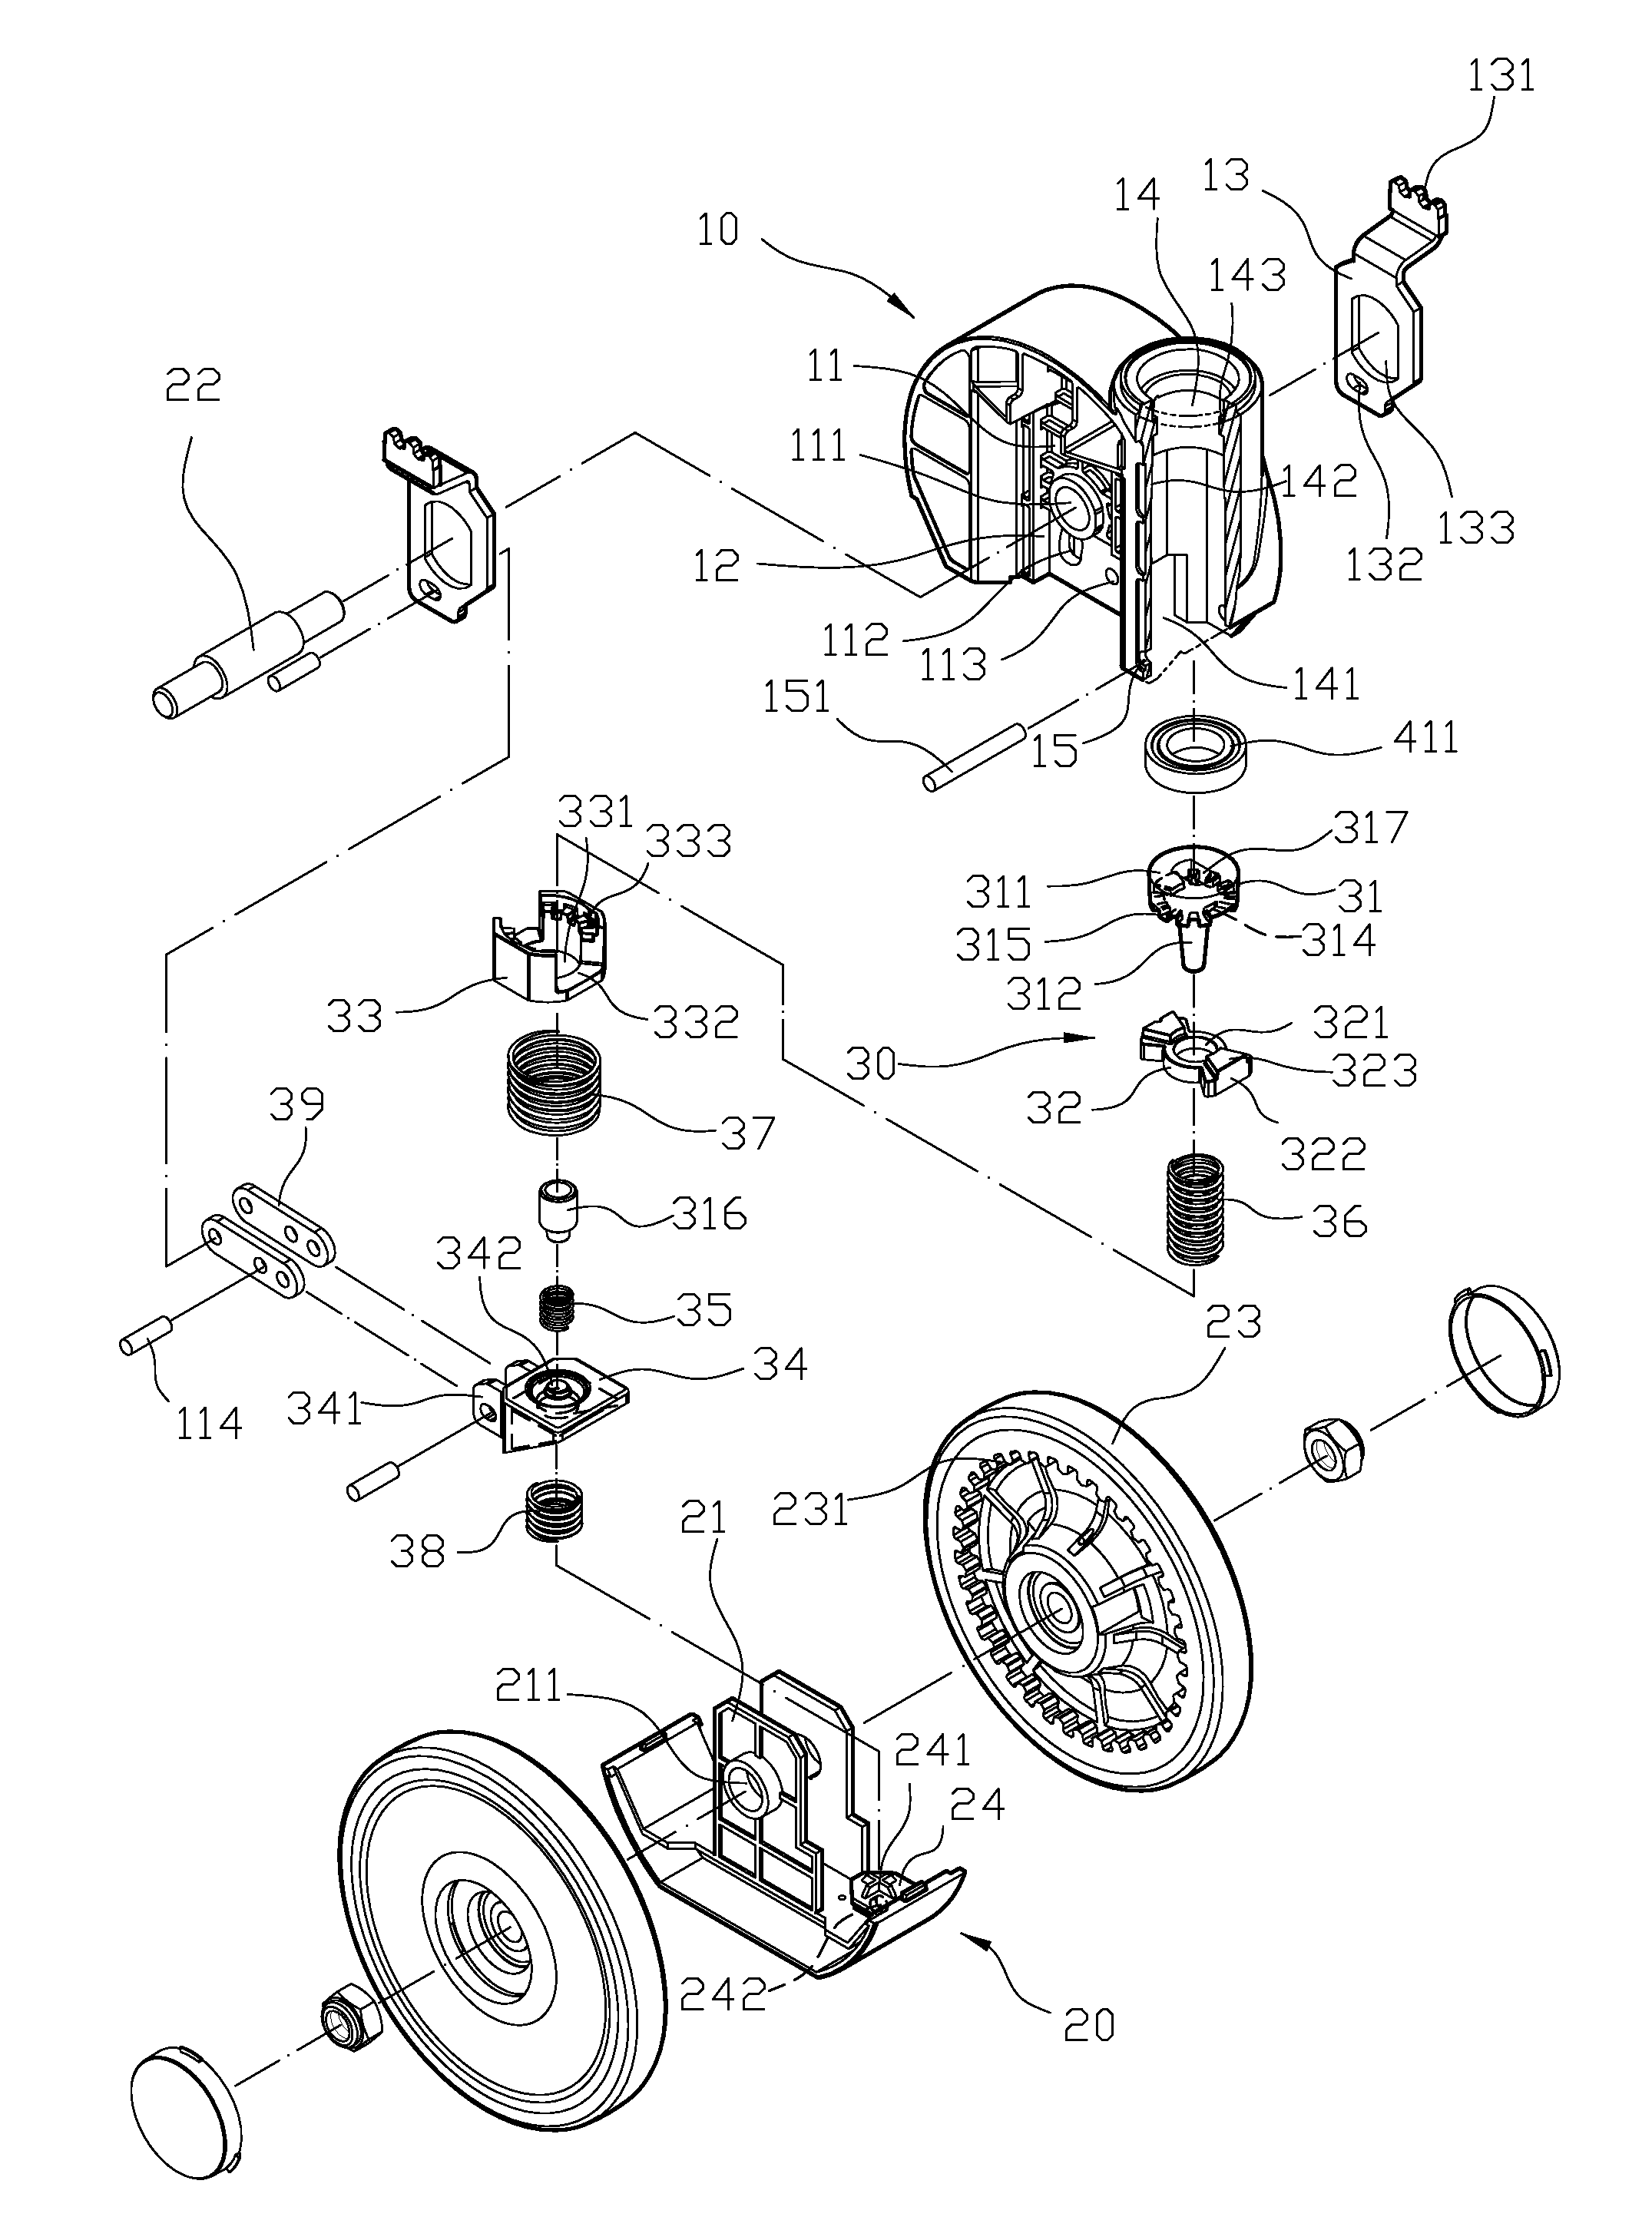 Central-controlled double wheel structure